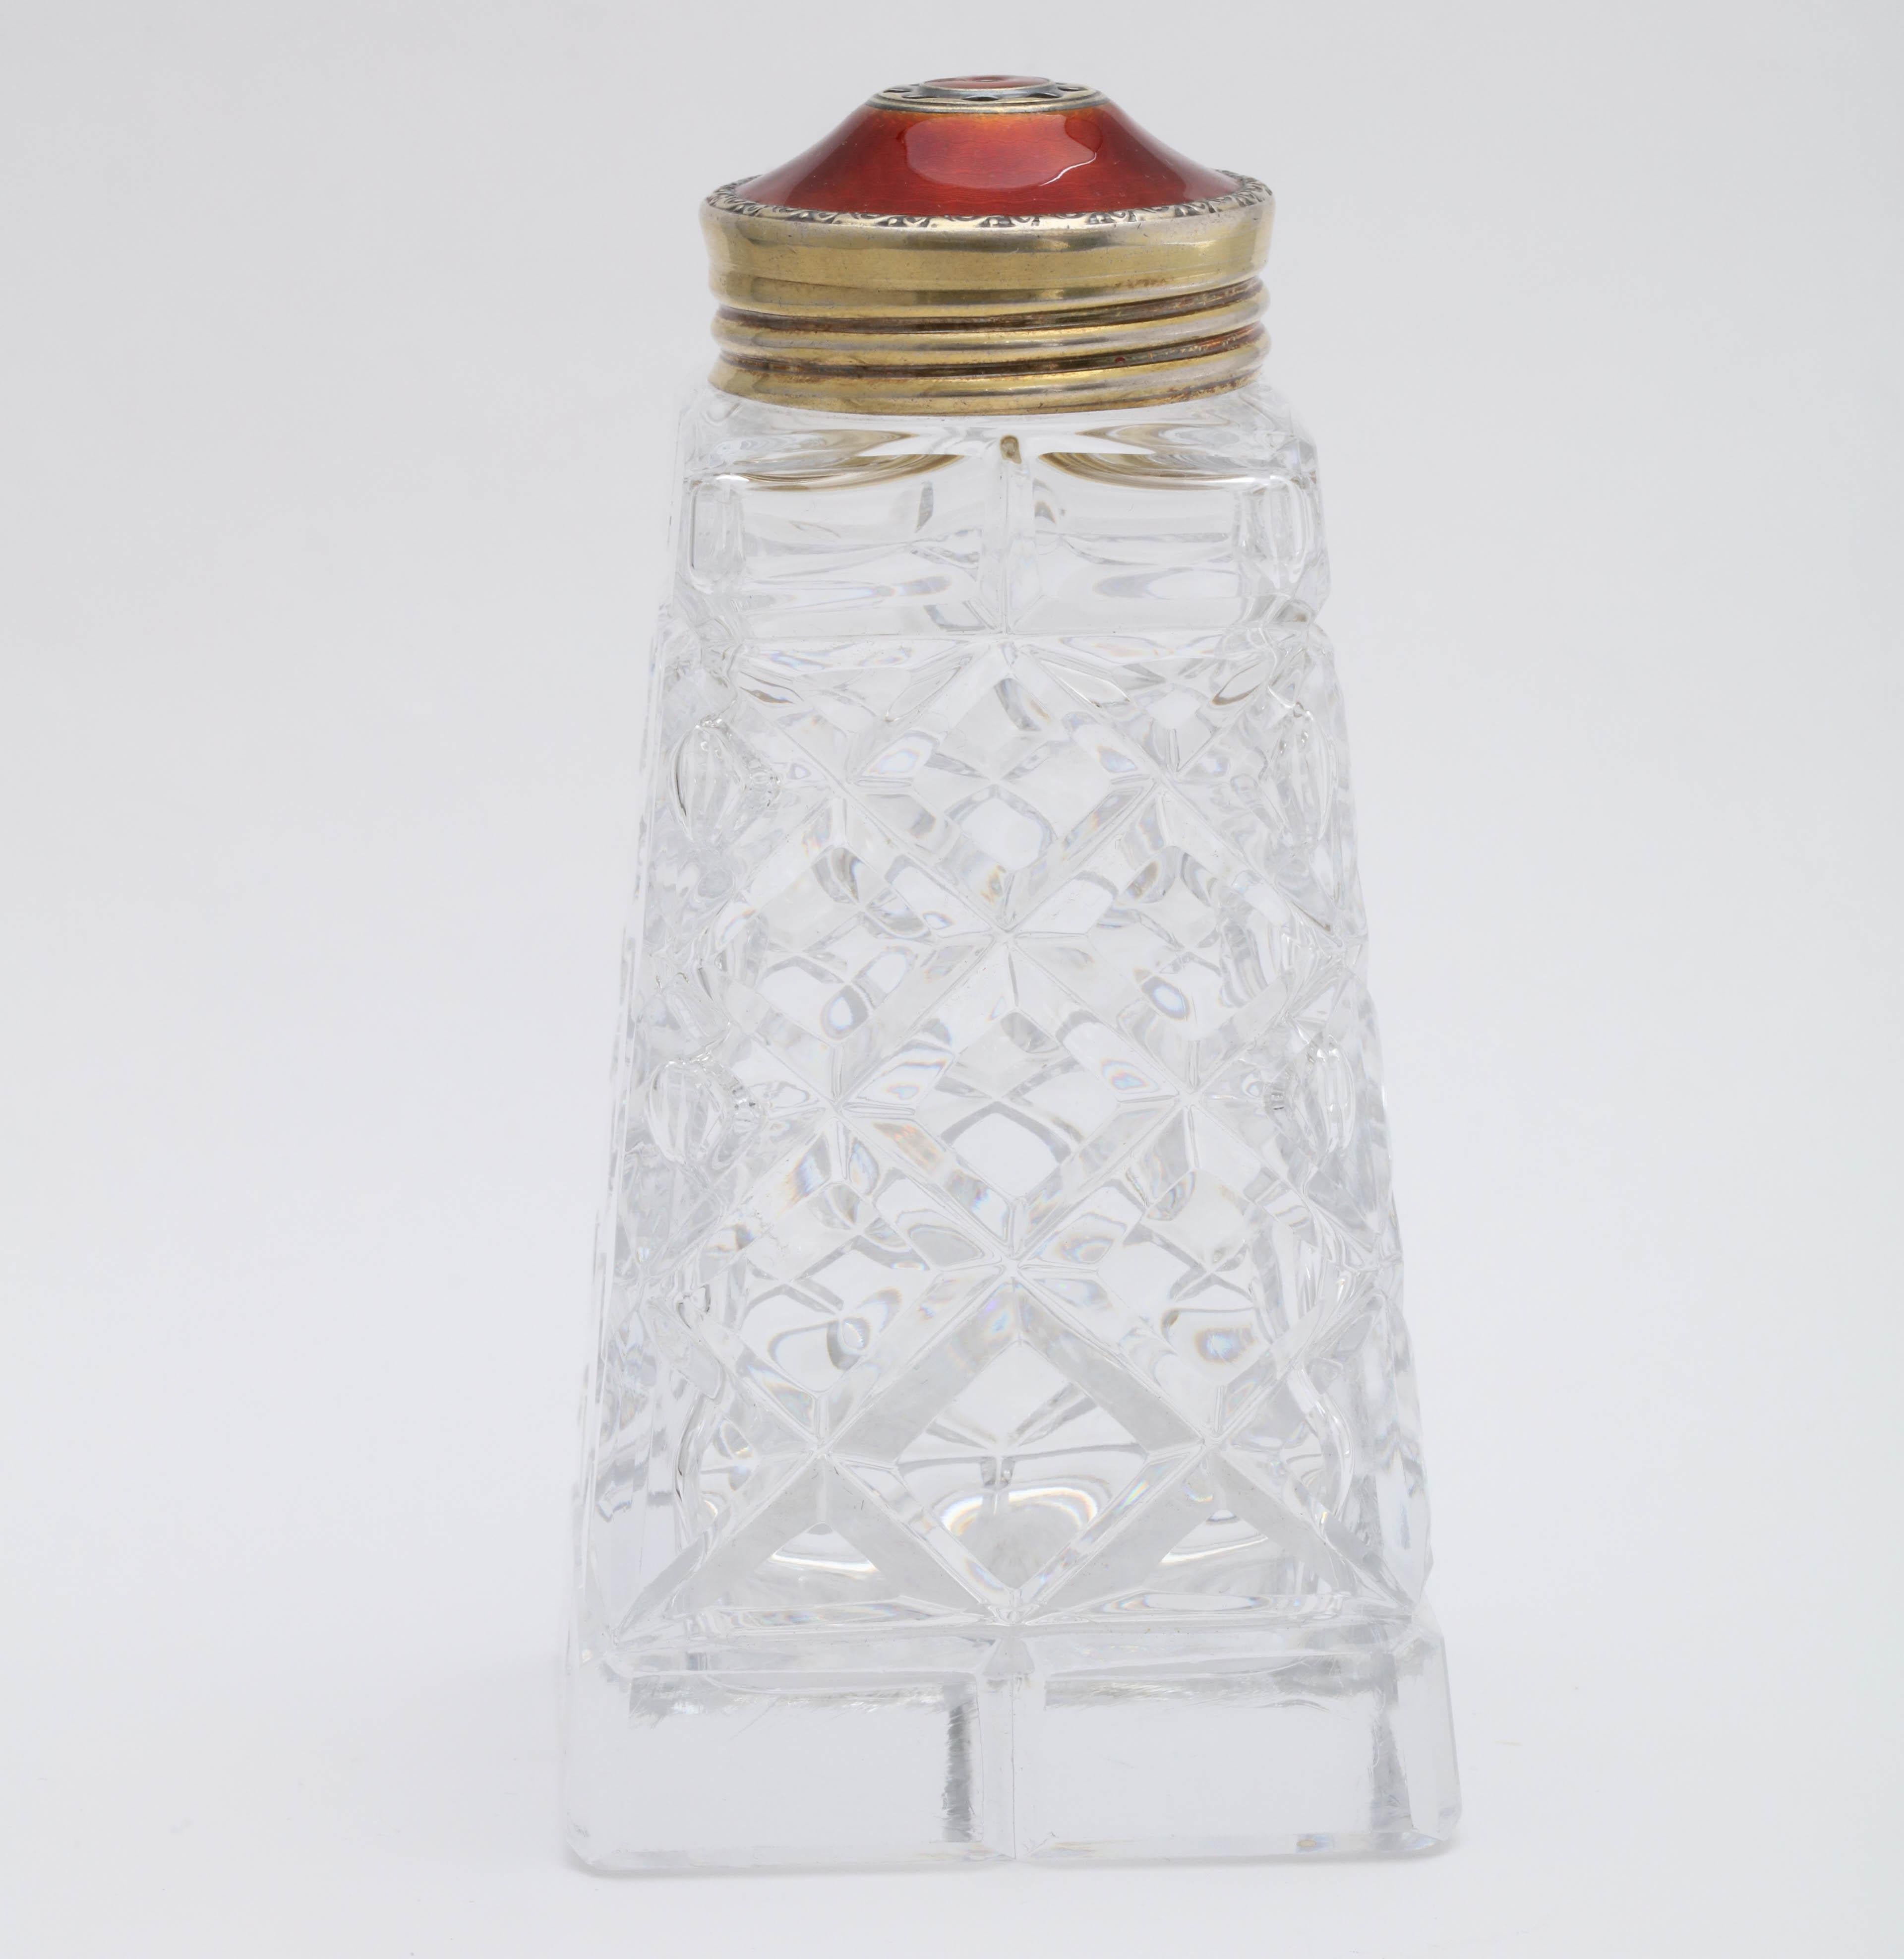 Art Deco, sterling silver-gilt and Red Guilloche enamel - mounted cut crystal sugar shaker, Oslo, Norway, Hroar Prydz - maker (worked from 1859-1937). Measures 5 inches tall 2 1/2 inches wide (at widest point 1/2 inches deep. (at deepest point).